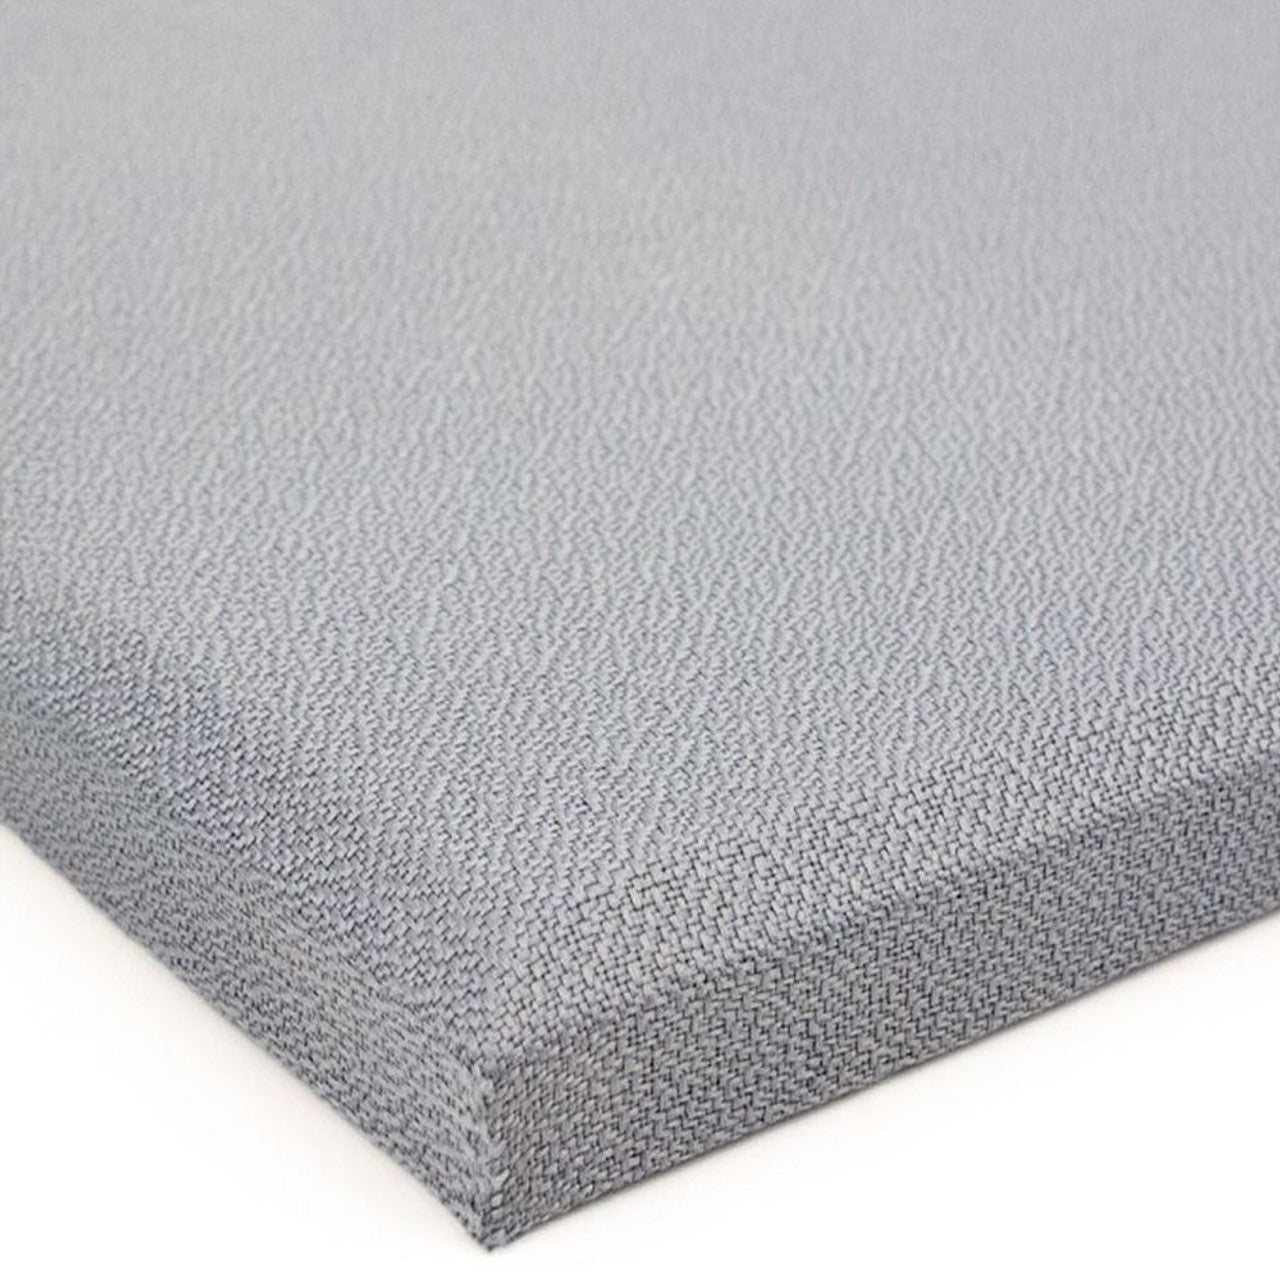 Imperative Audio SP1 Acoustic Panels 4 PACK GREY - 1200 X 600 X 25mm